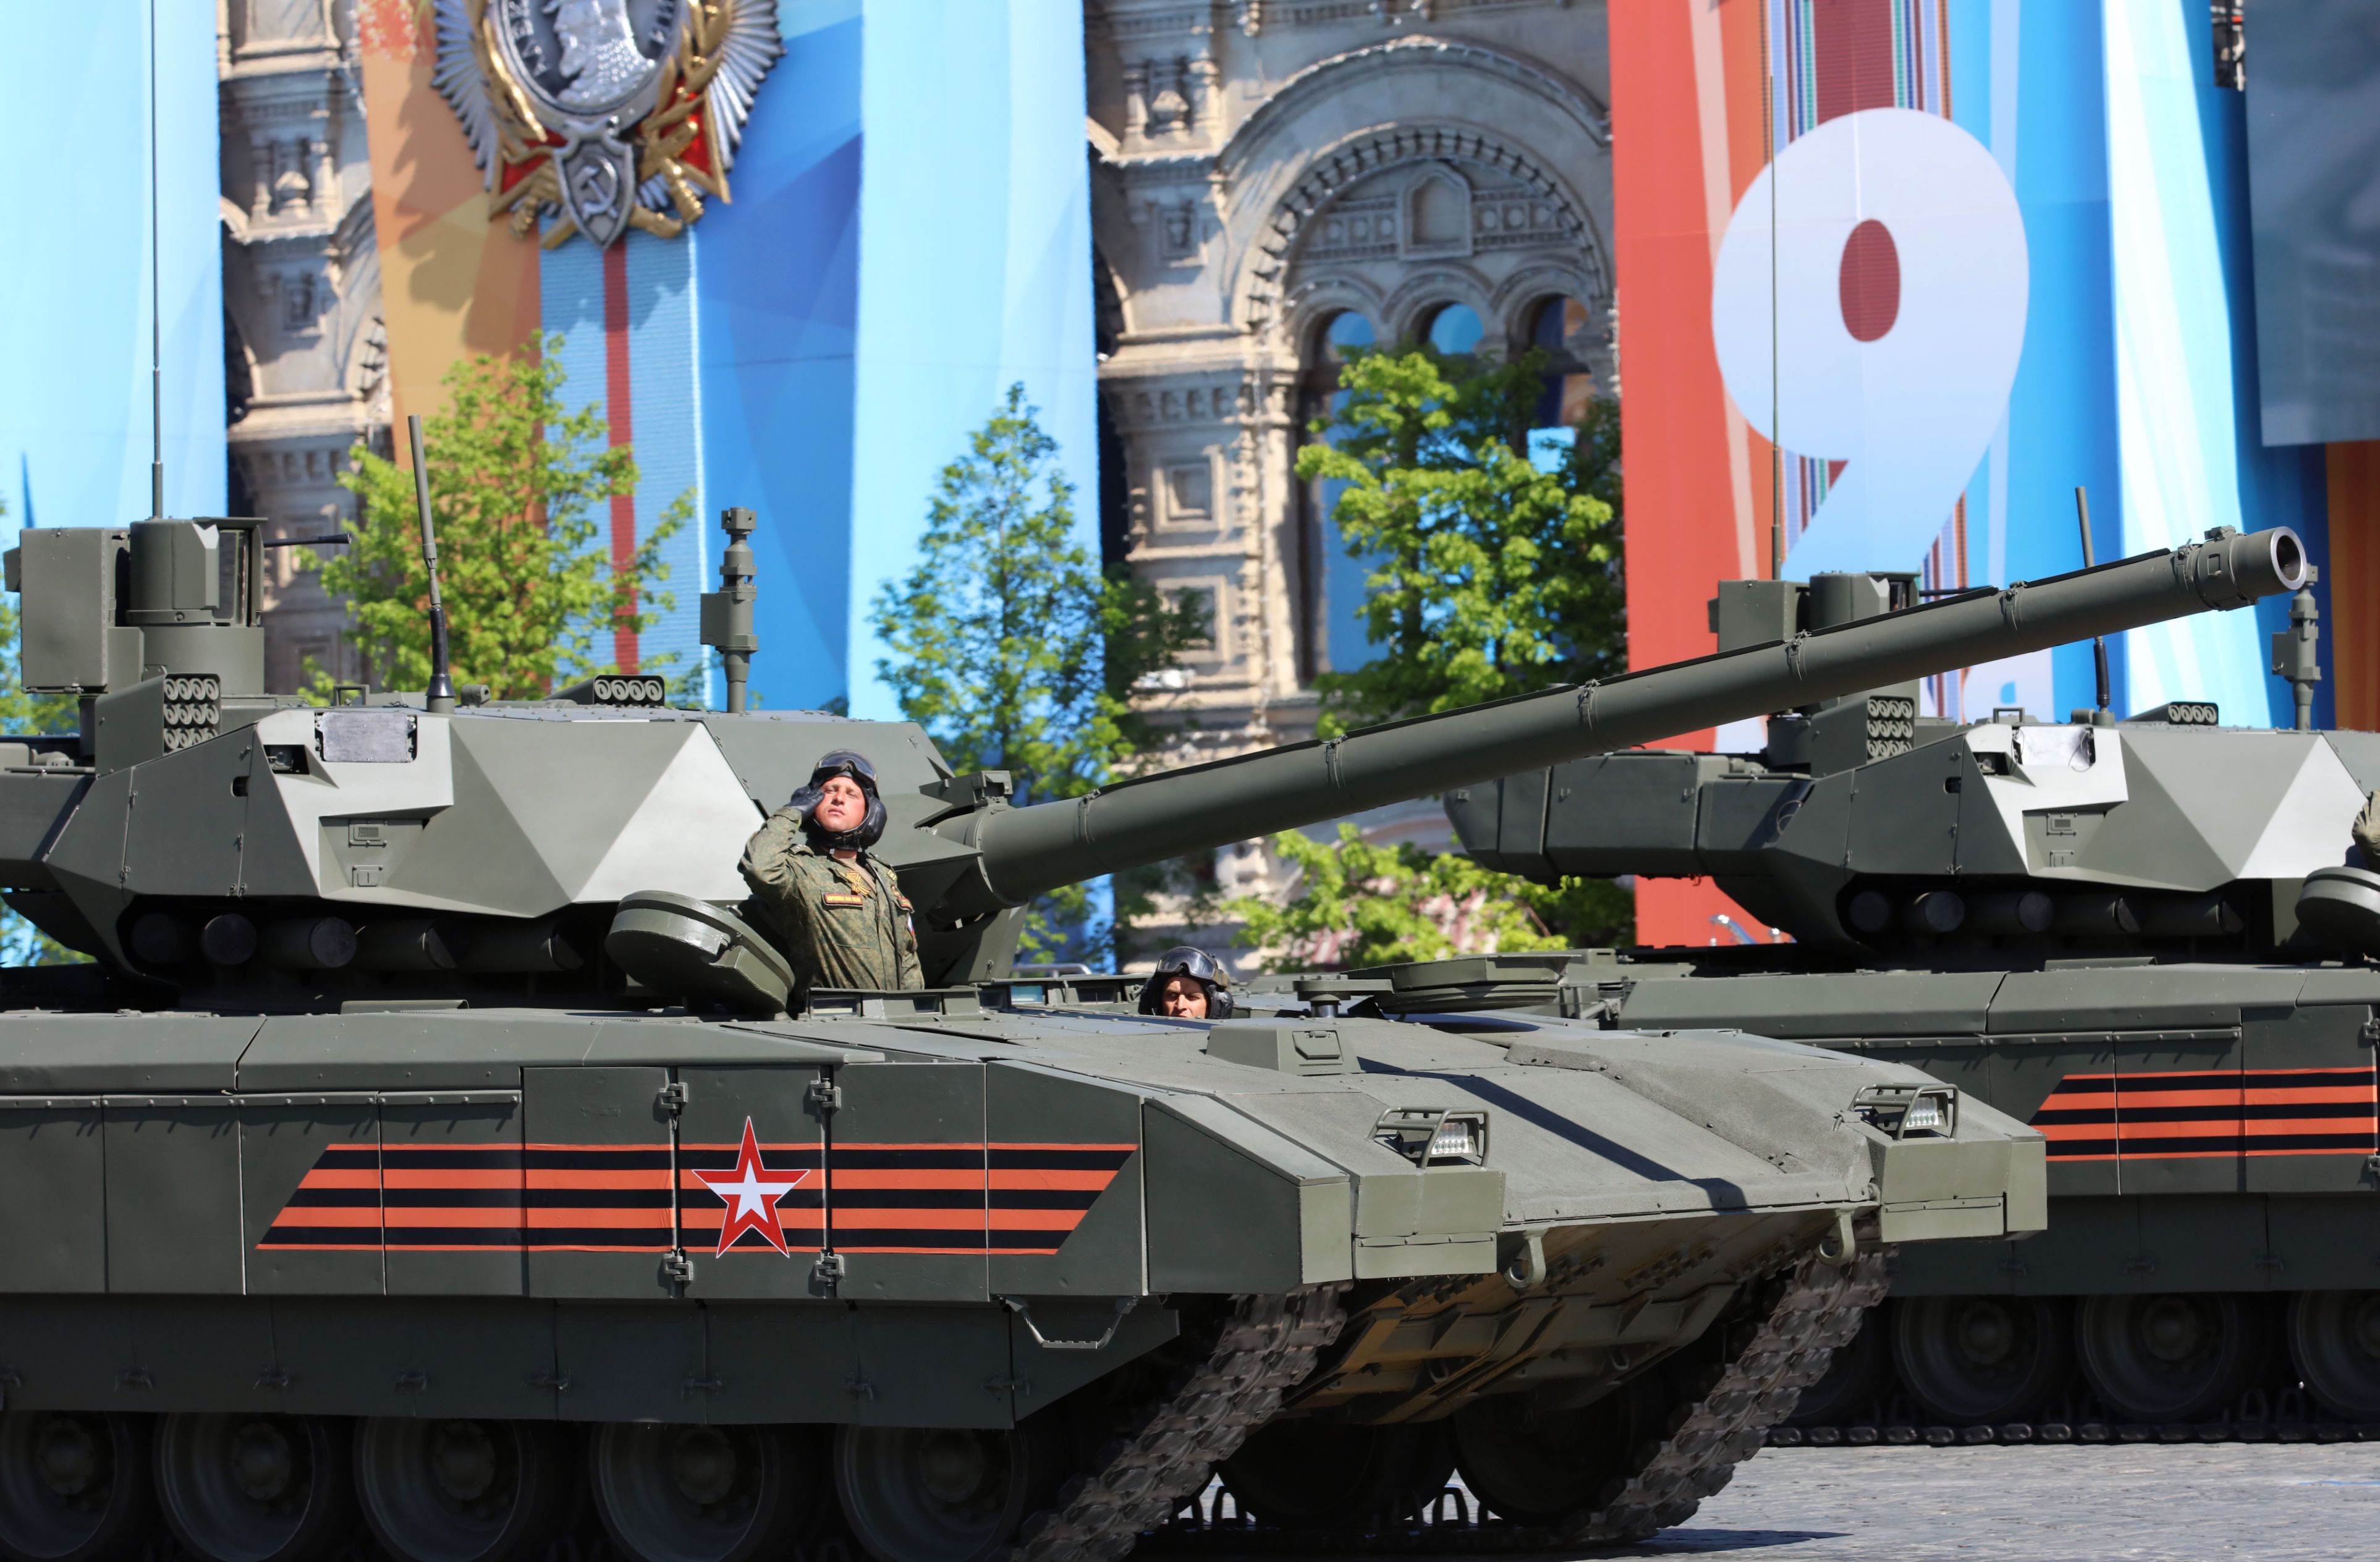 an-armata-t-14-battle-tank-is-seen-during-the-victory-day-news-photo-956810882-1550085632.jpg